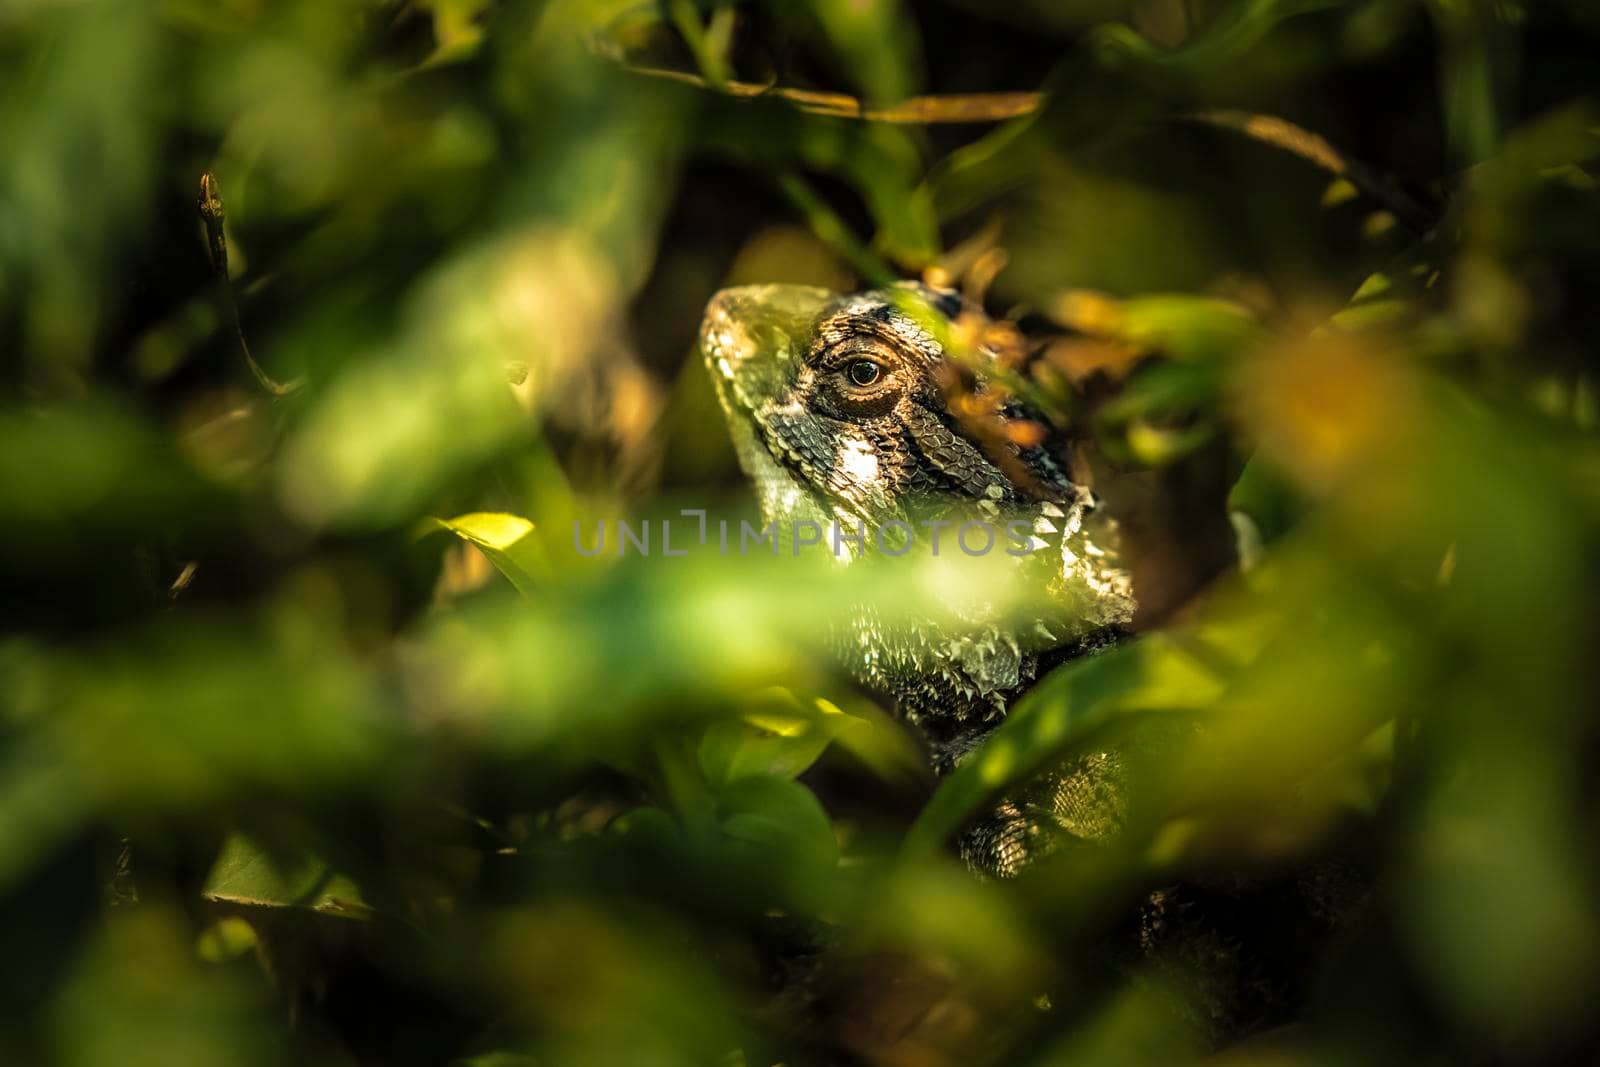 A grey lizard hiding amongst green leaves and looking out via a small gap by WittkePhotos